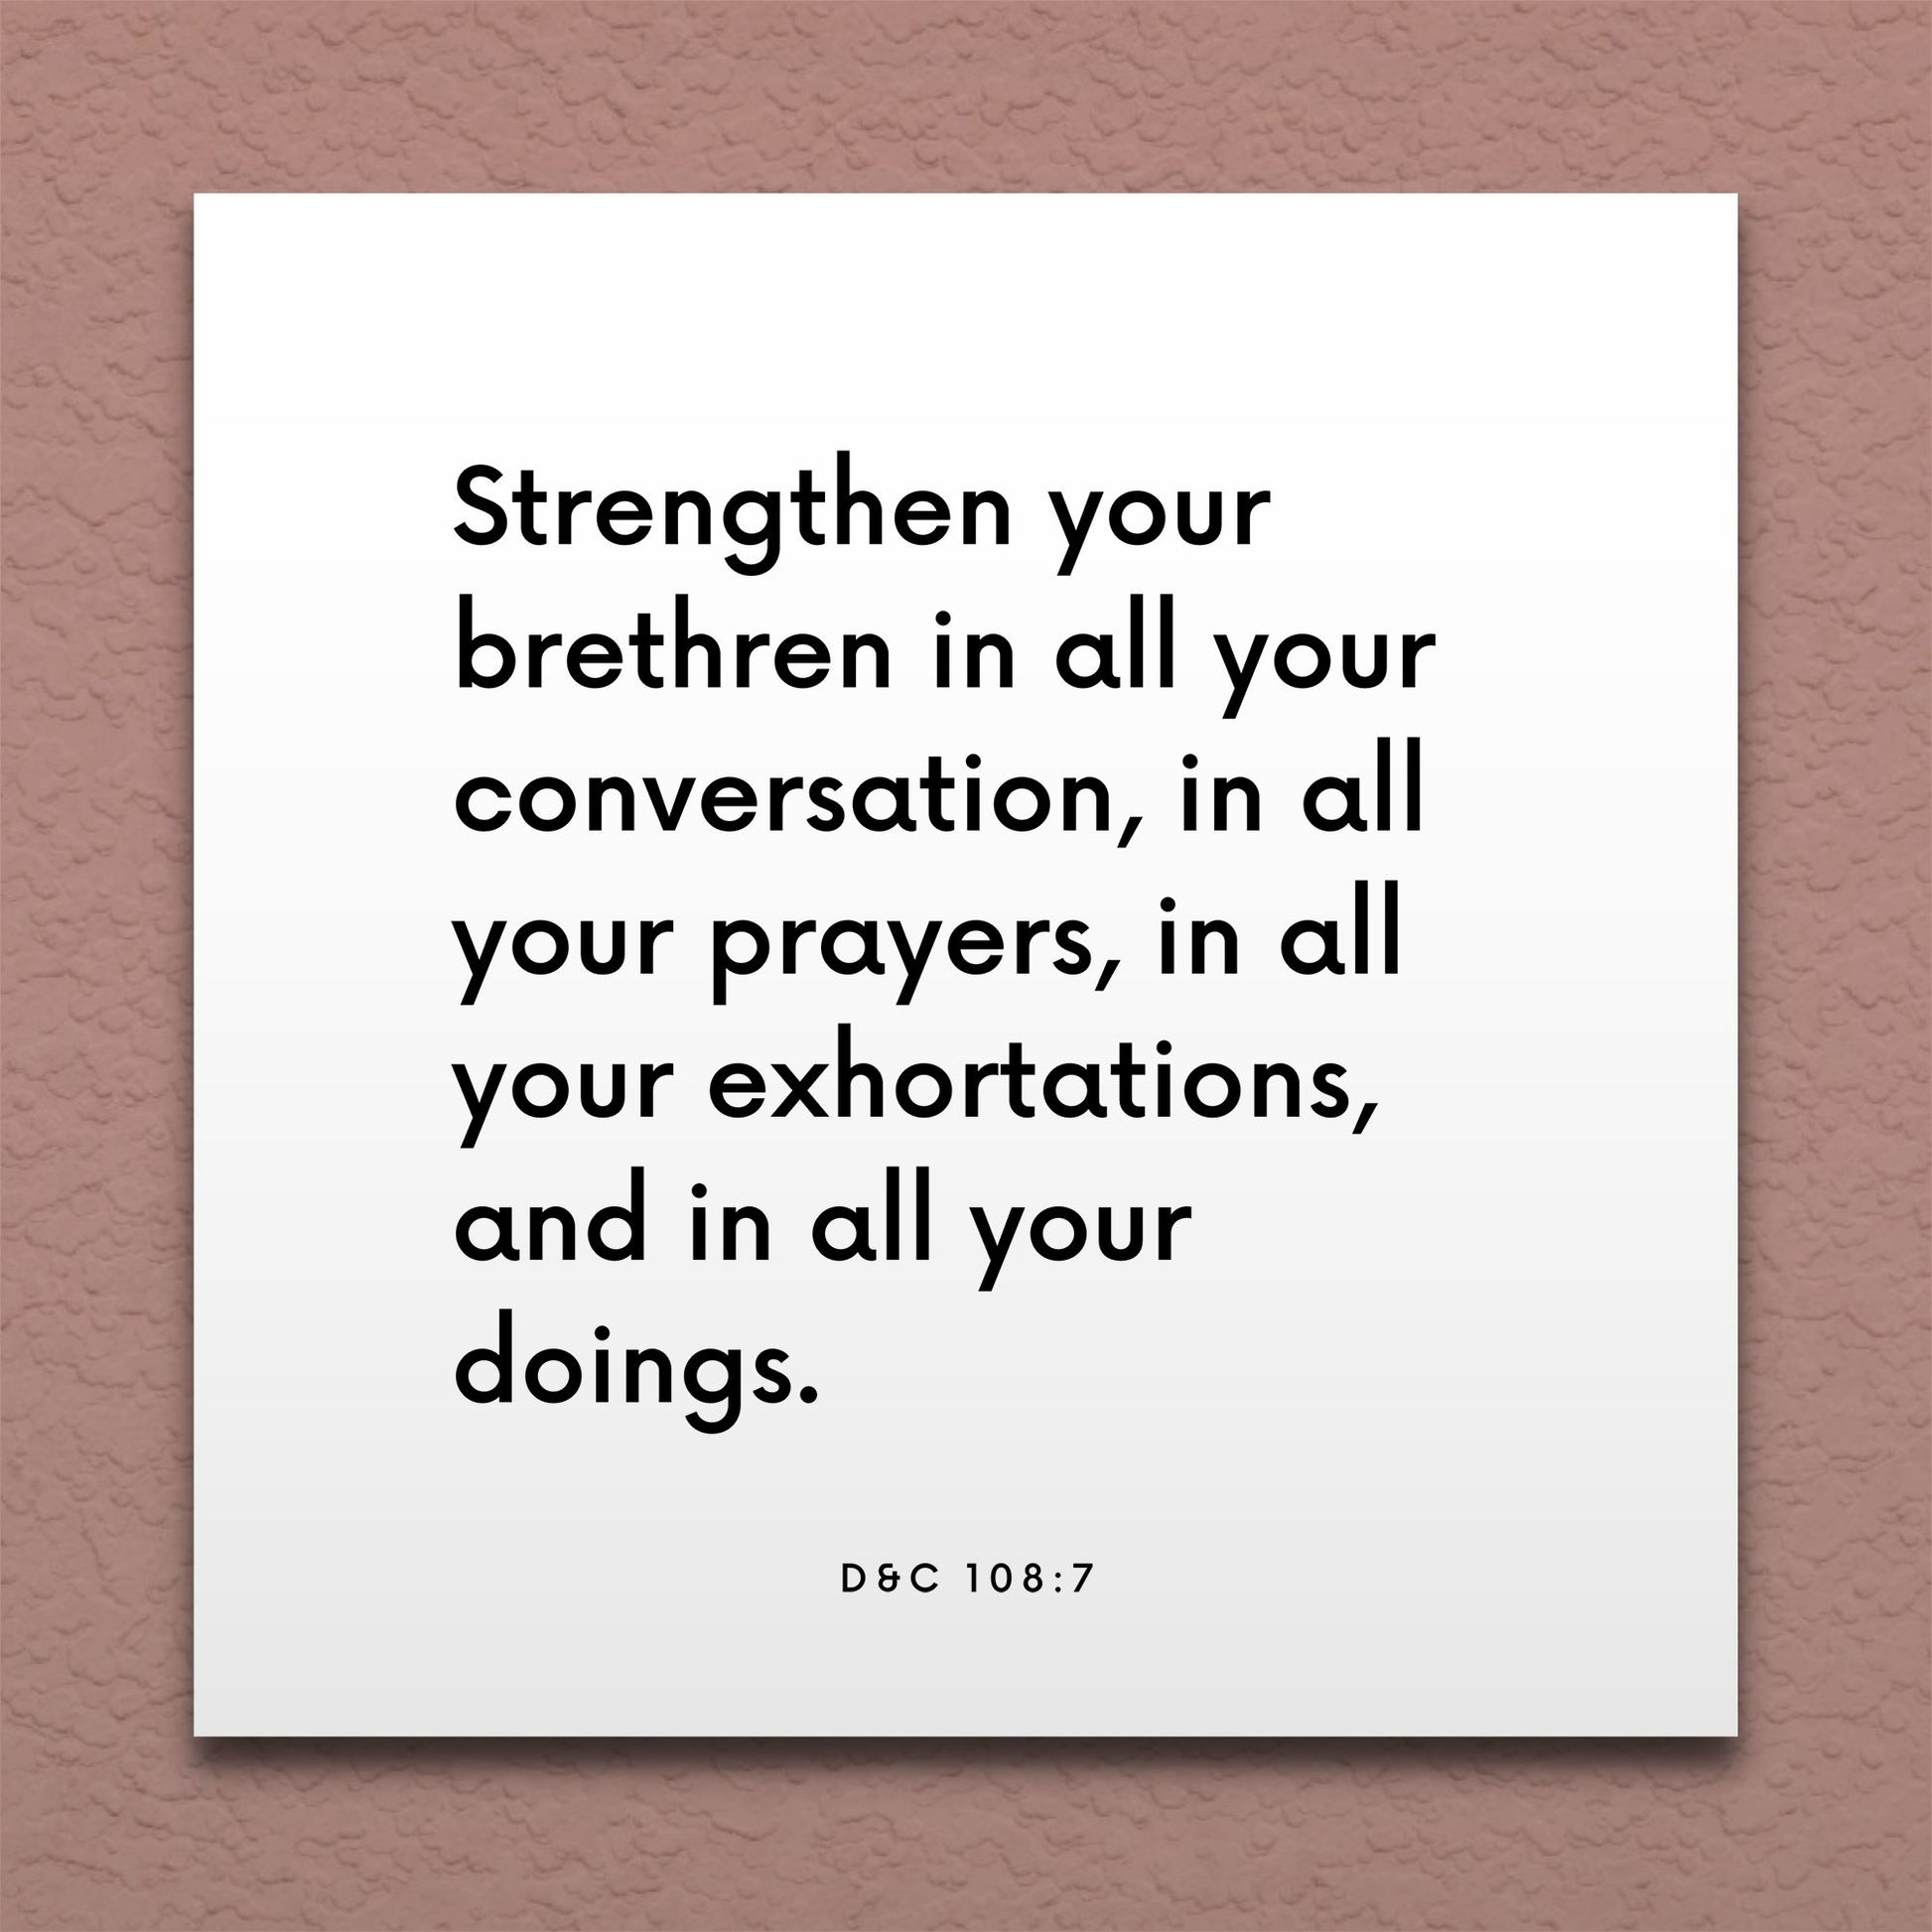 Wall-mounted scripture tile for D&C 108:7 - "Strengthen your brethren in all your conversation"